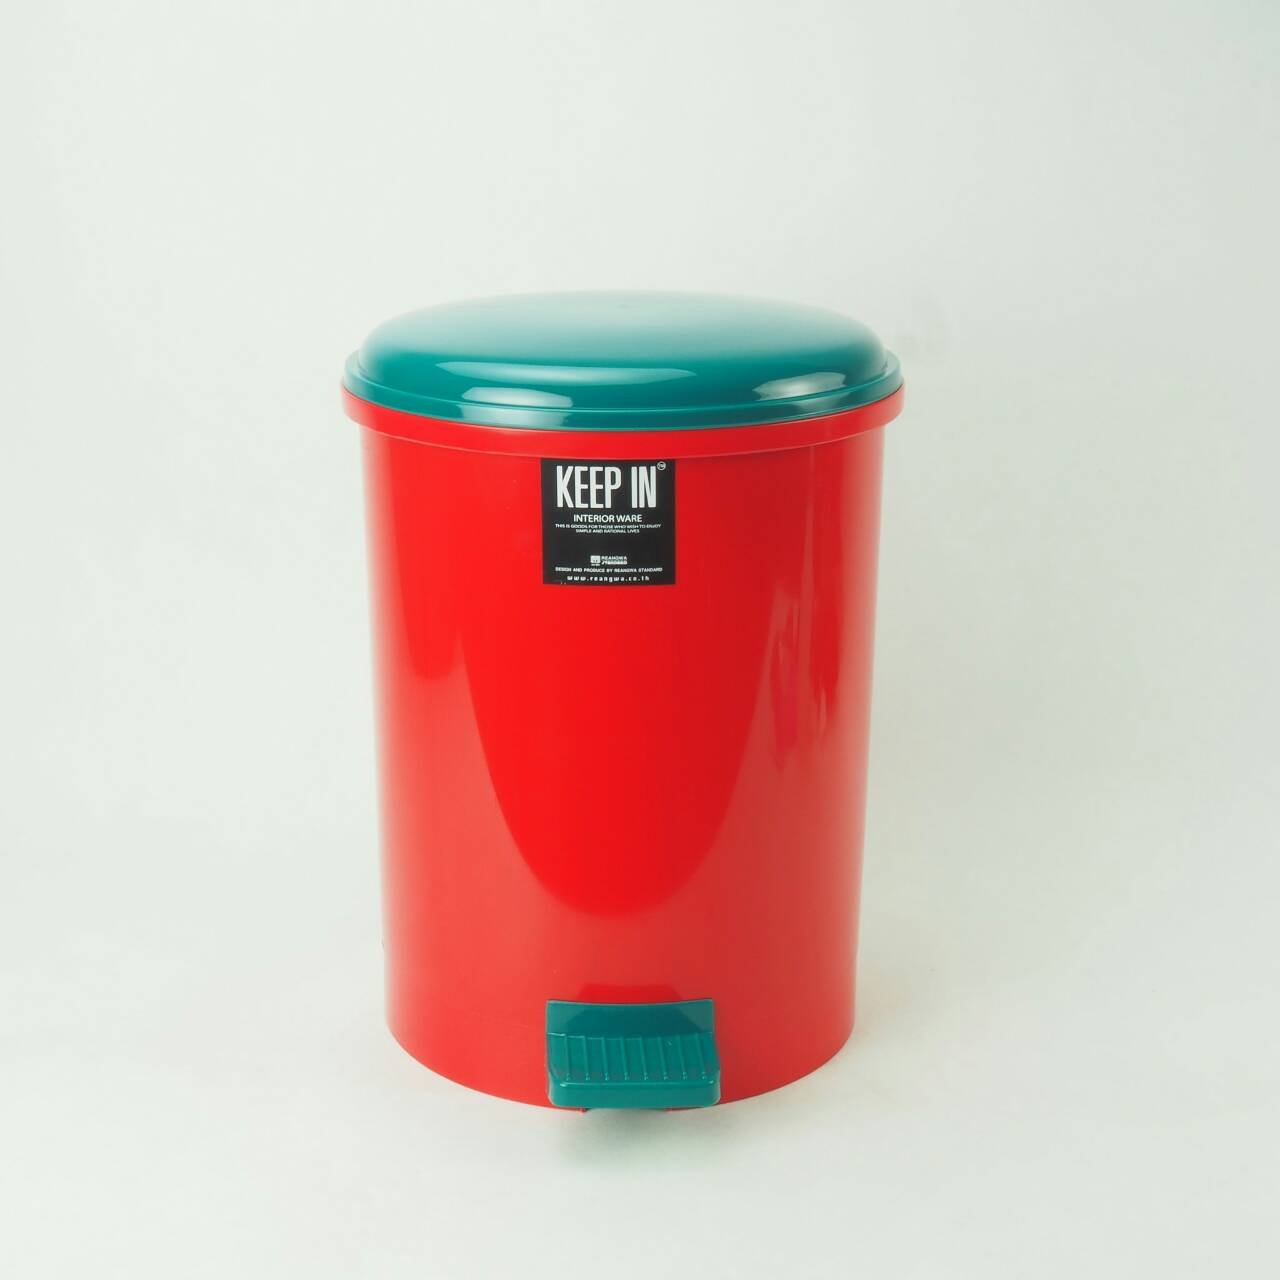 Round foot-pedaled plastic waste bin, size 18 L.